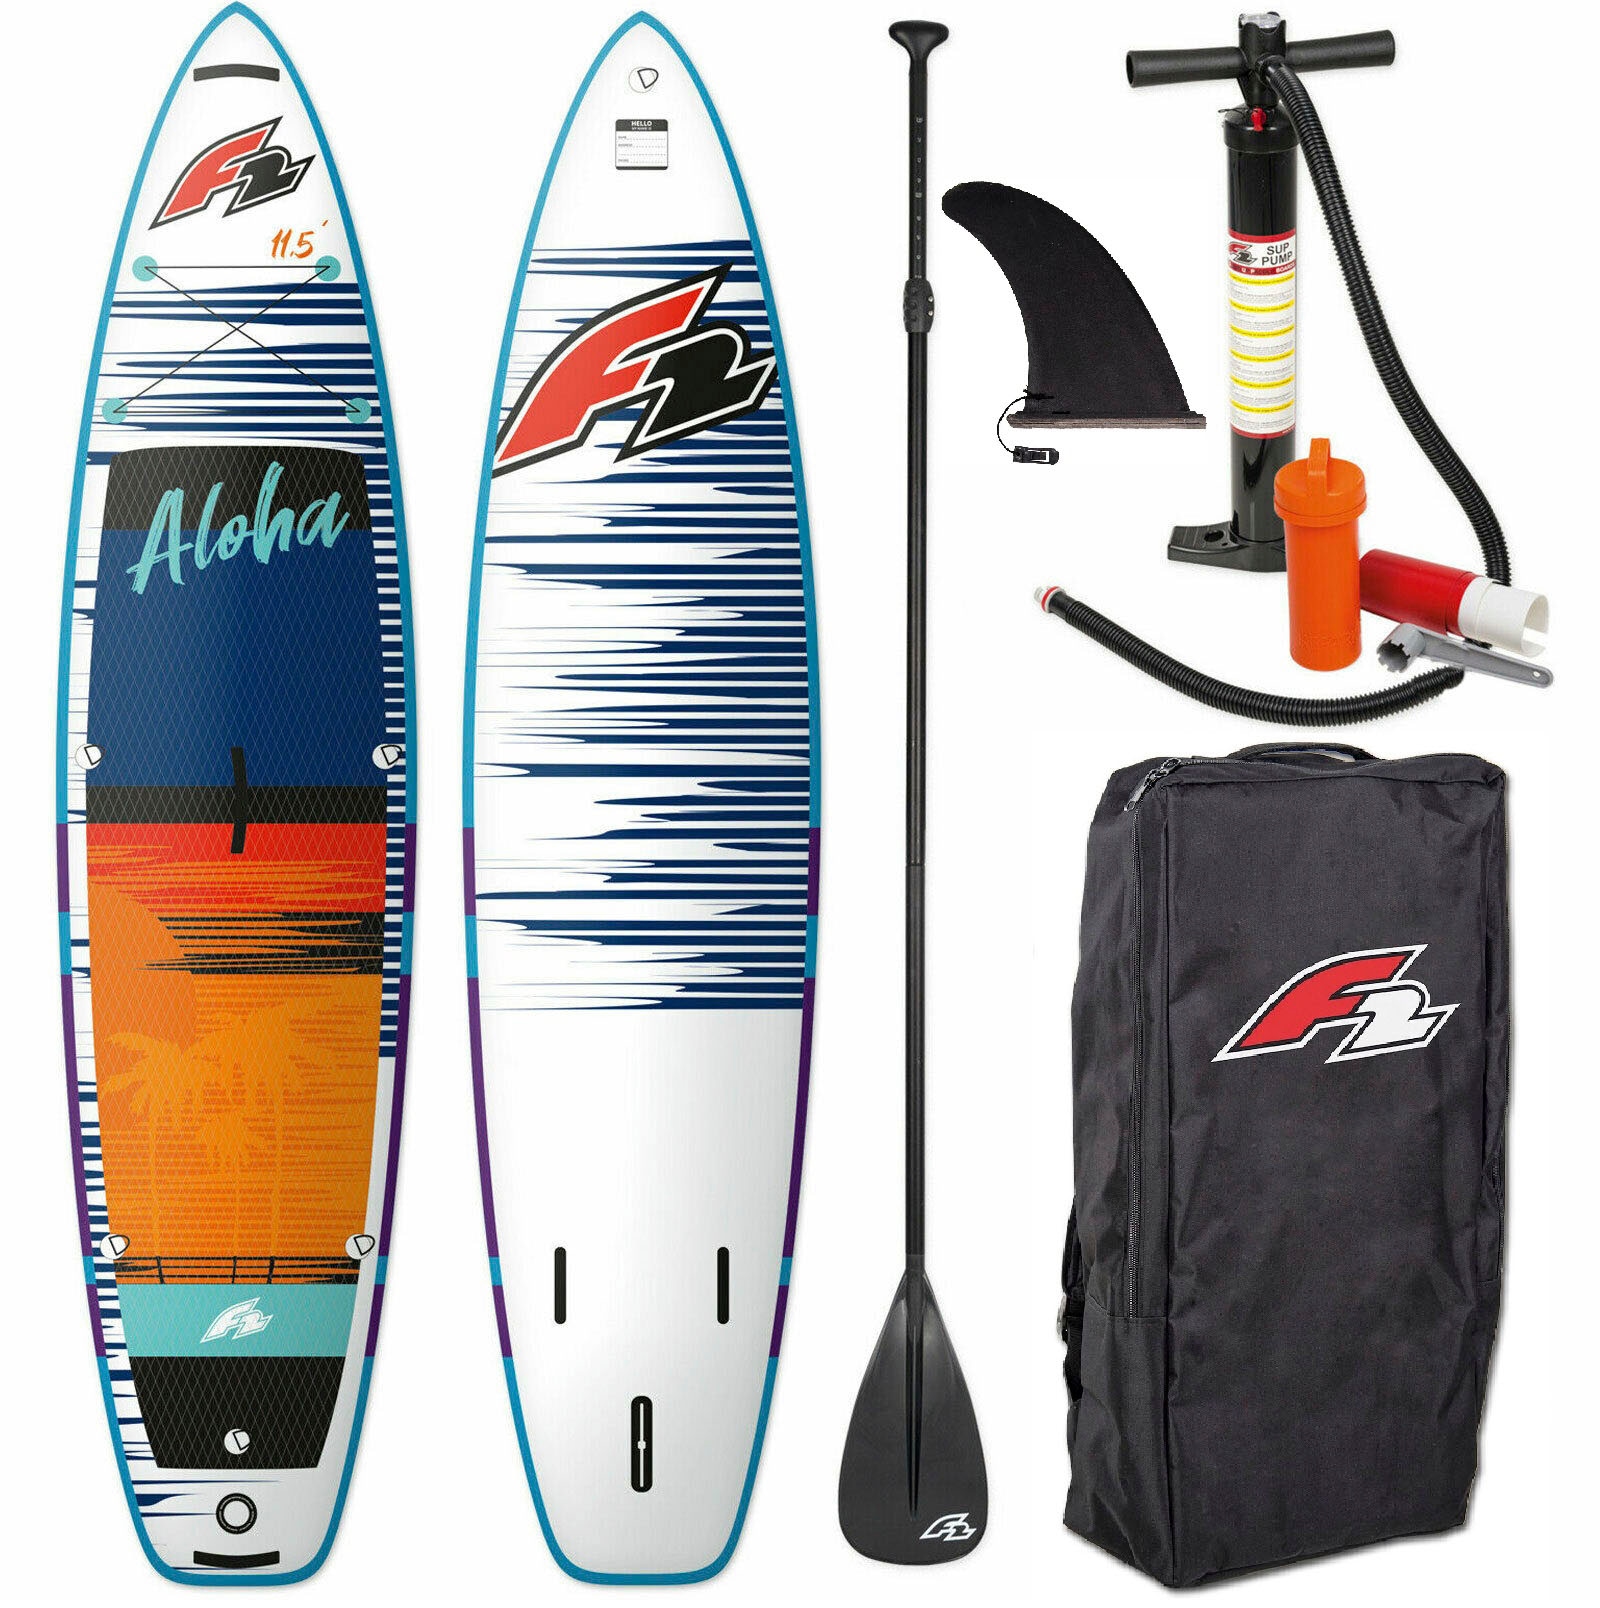 (Packung, »Aloha Inflatable bei red«, tlg.) 5 F2 SUP-Board 10,5